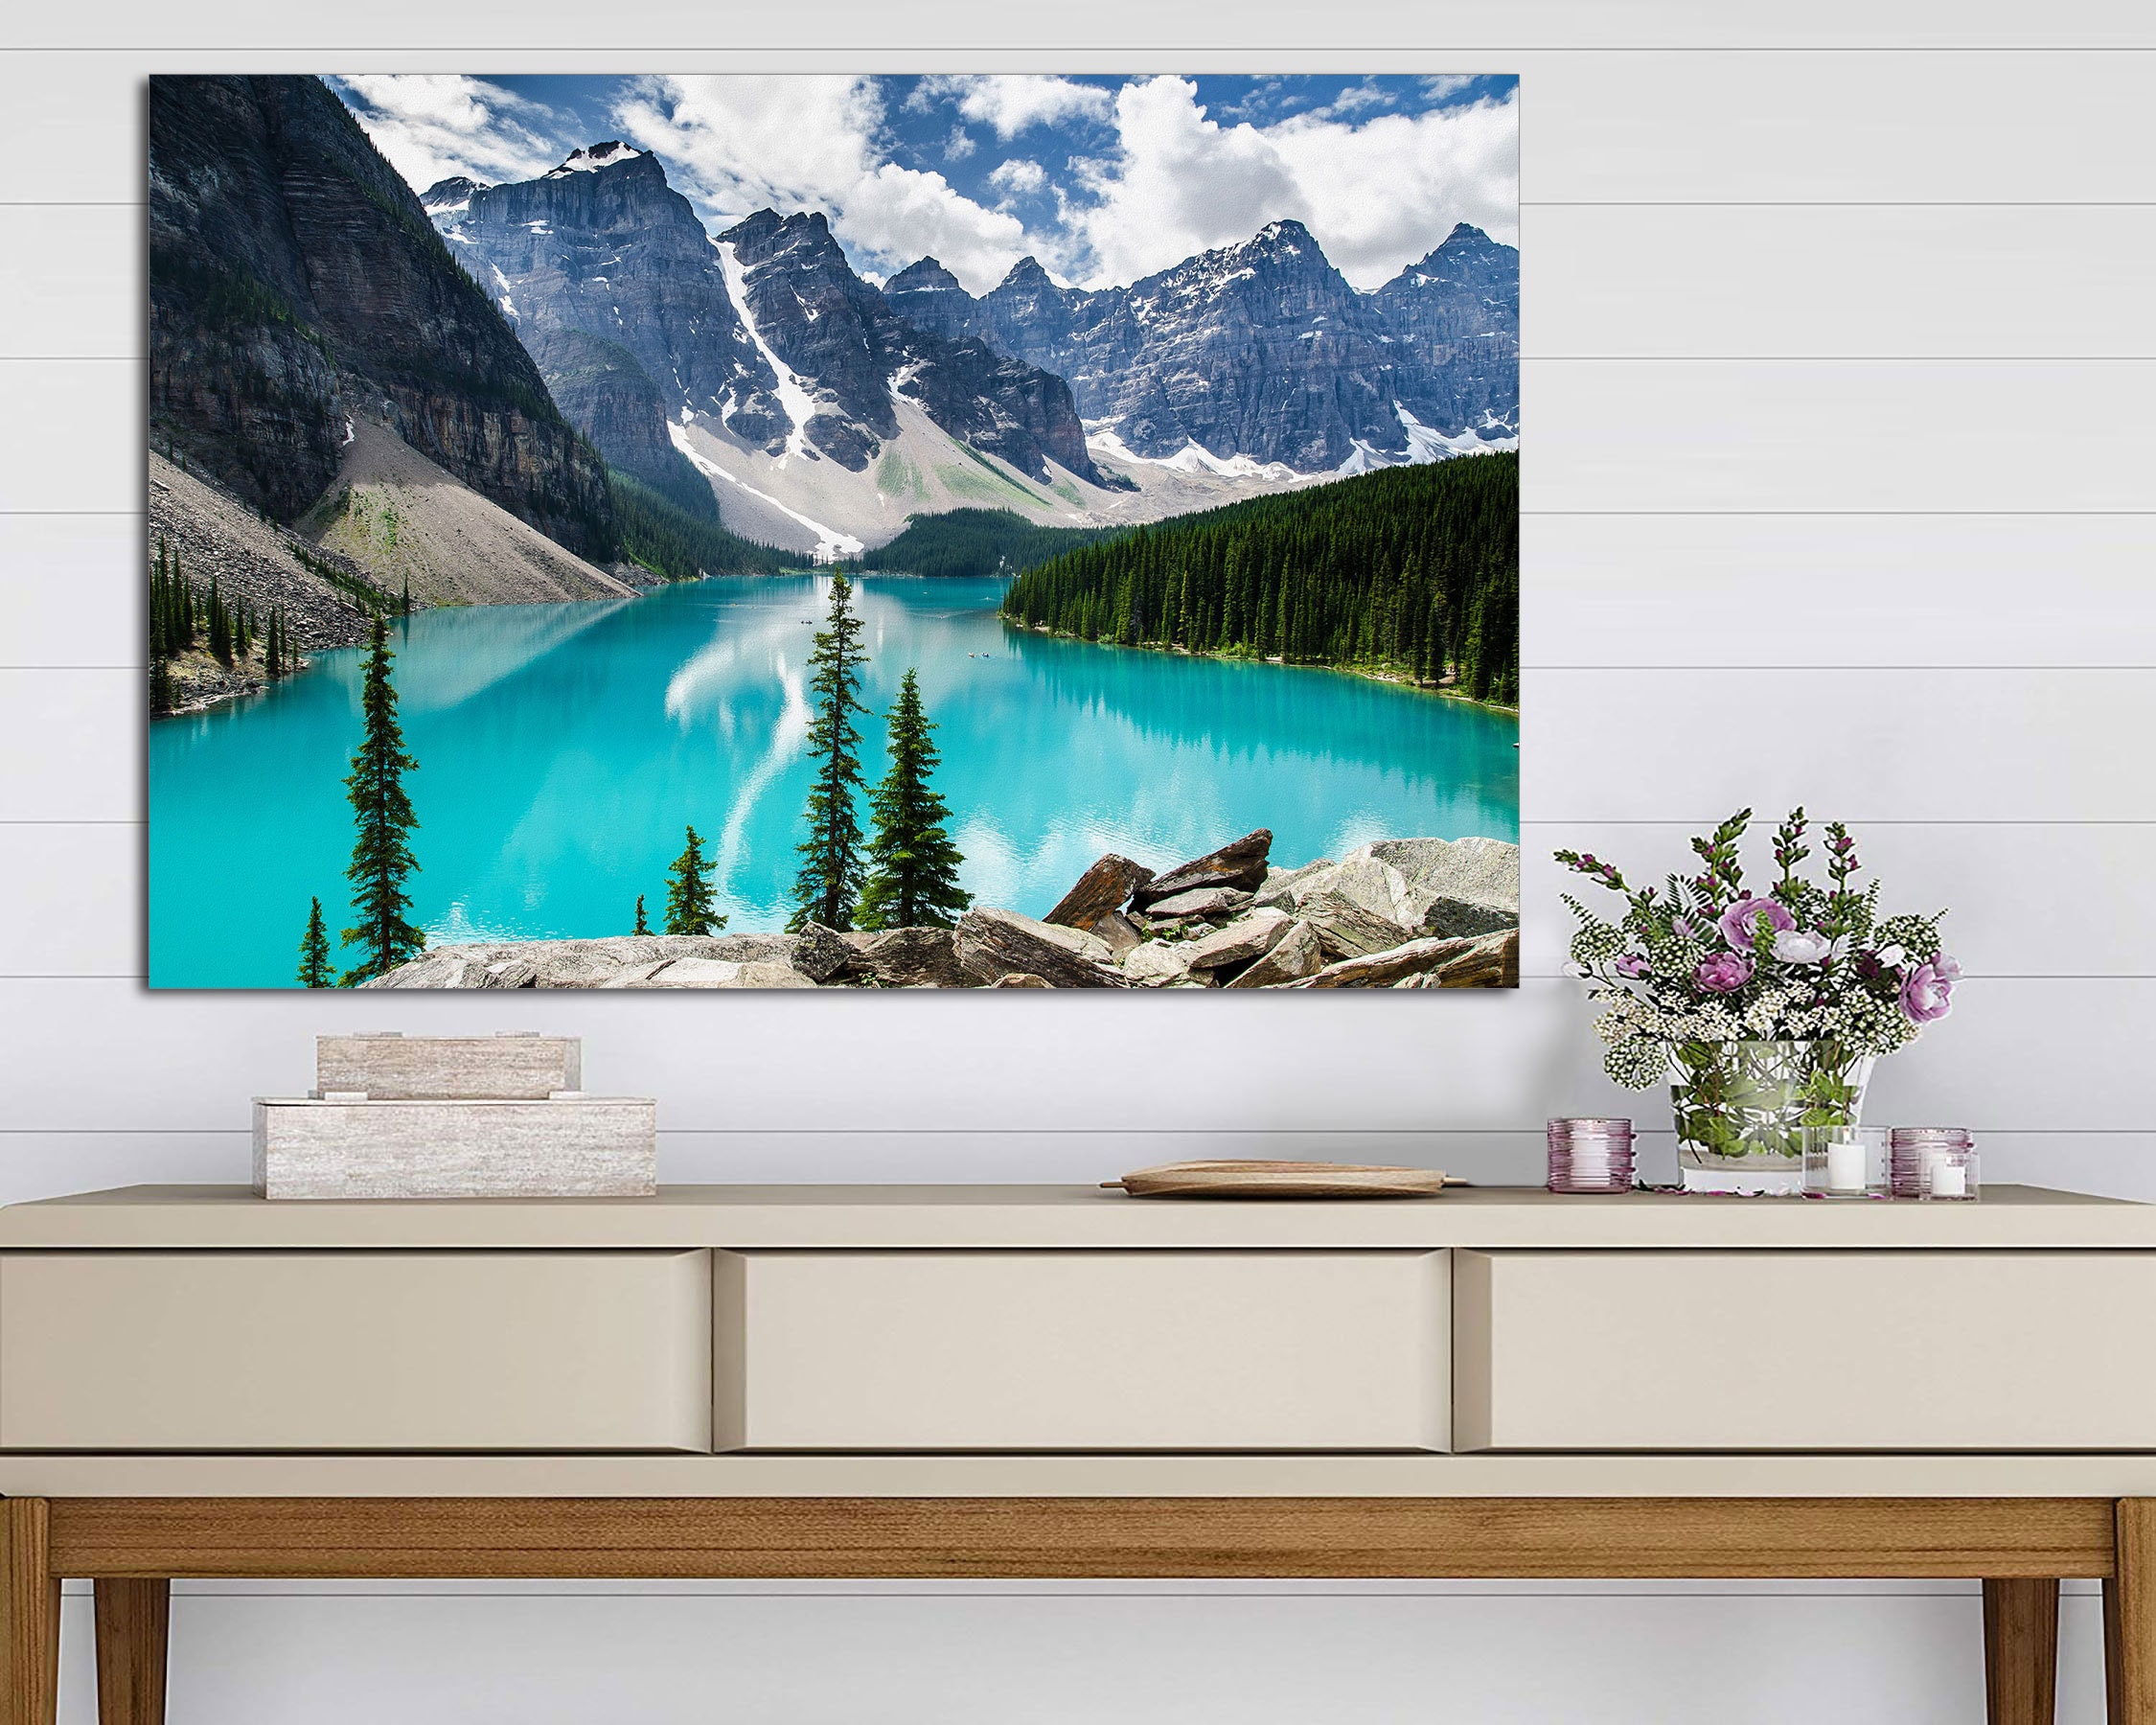 Moraine lake beautiful turquoise colored lake in nature of | Etsy